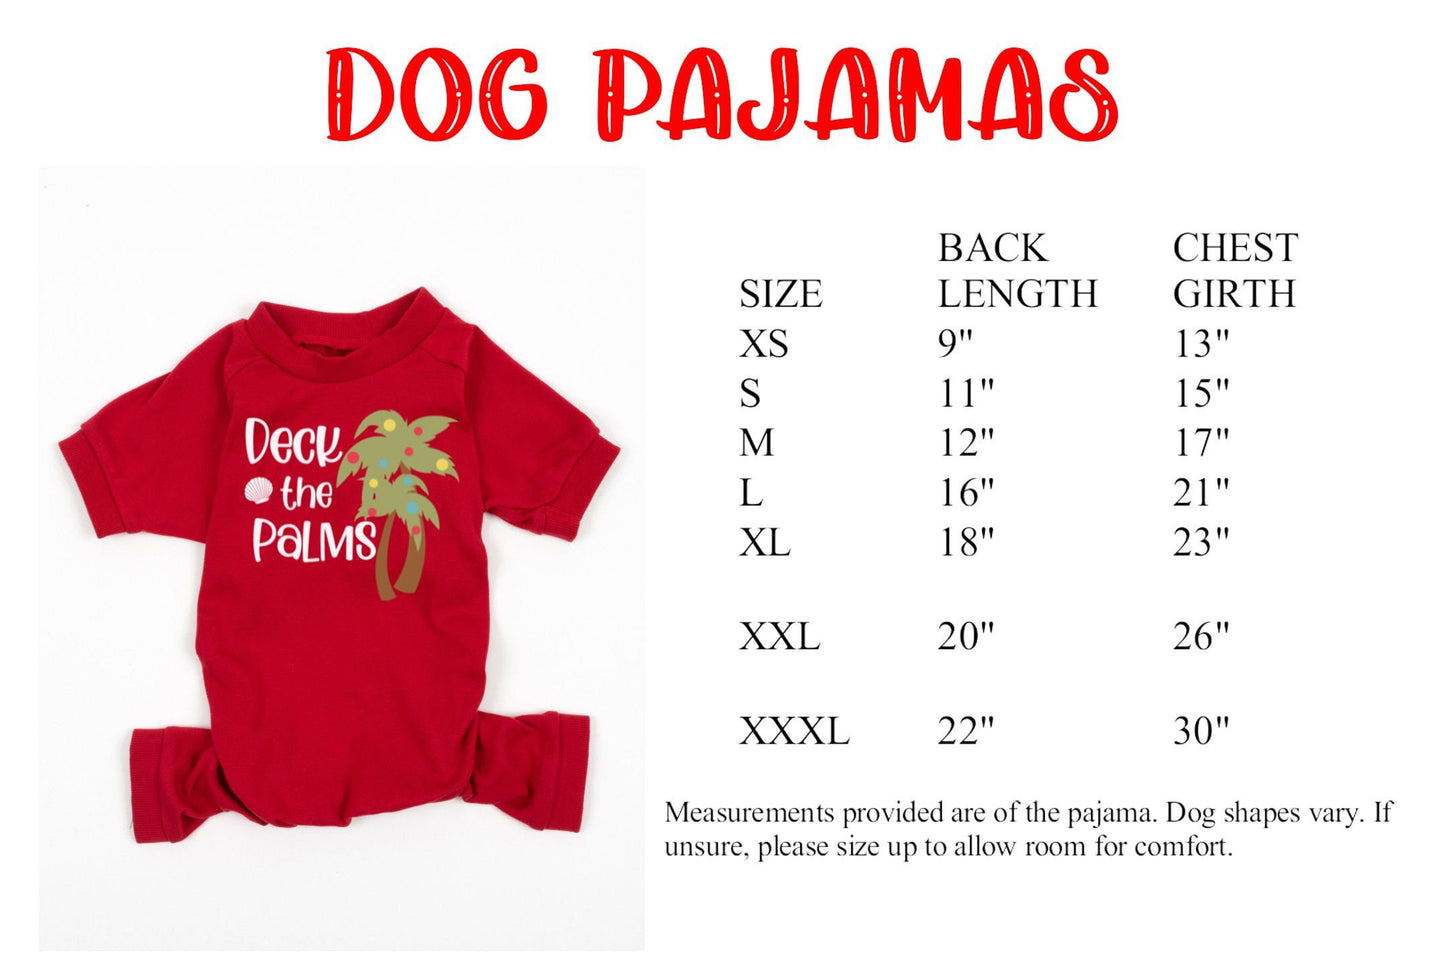 Deck the Palms Red Top Striped Christmas Pajamas - beach christmas - nautical christmas - coastal christmas